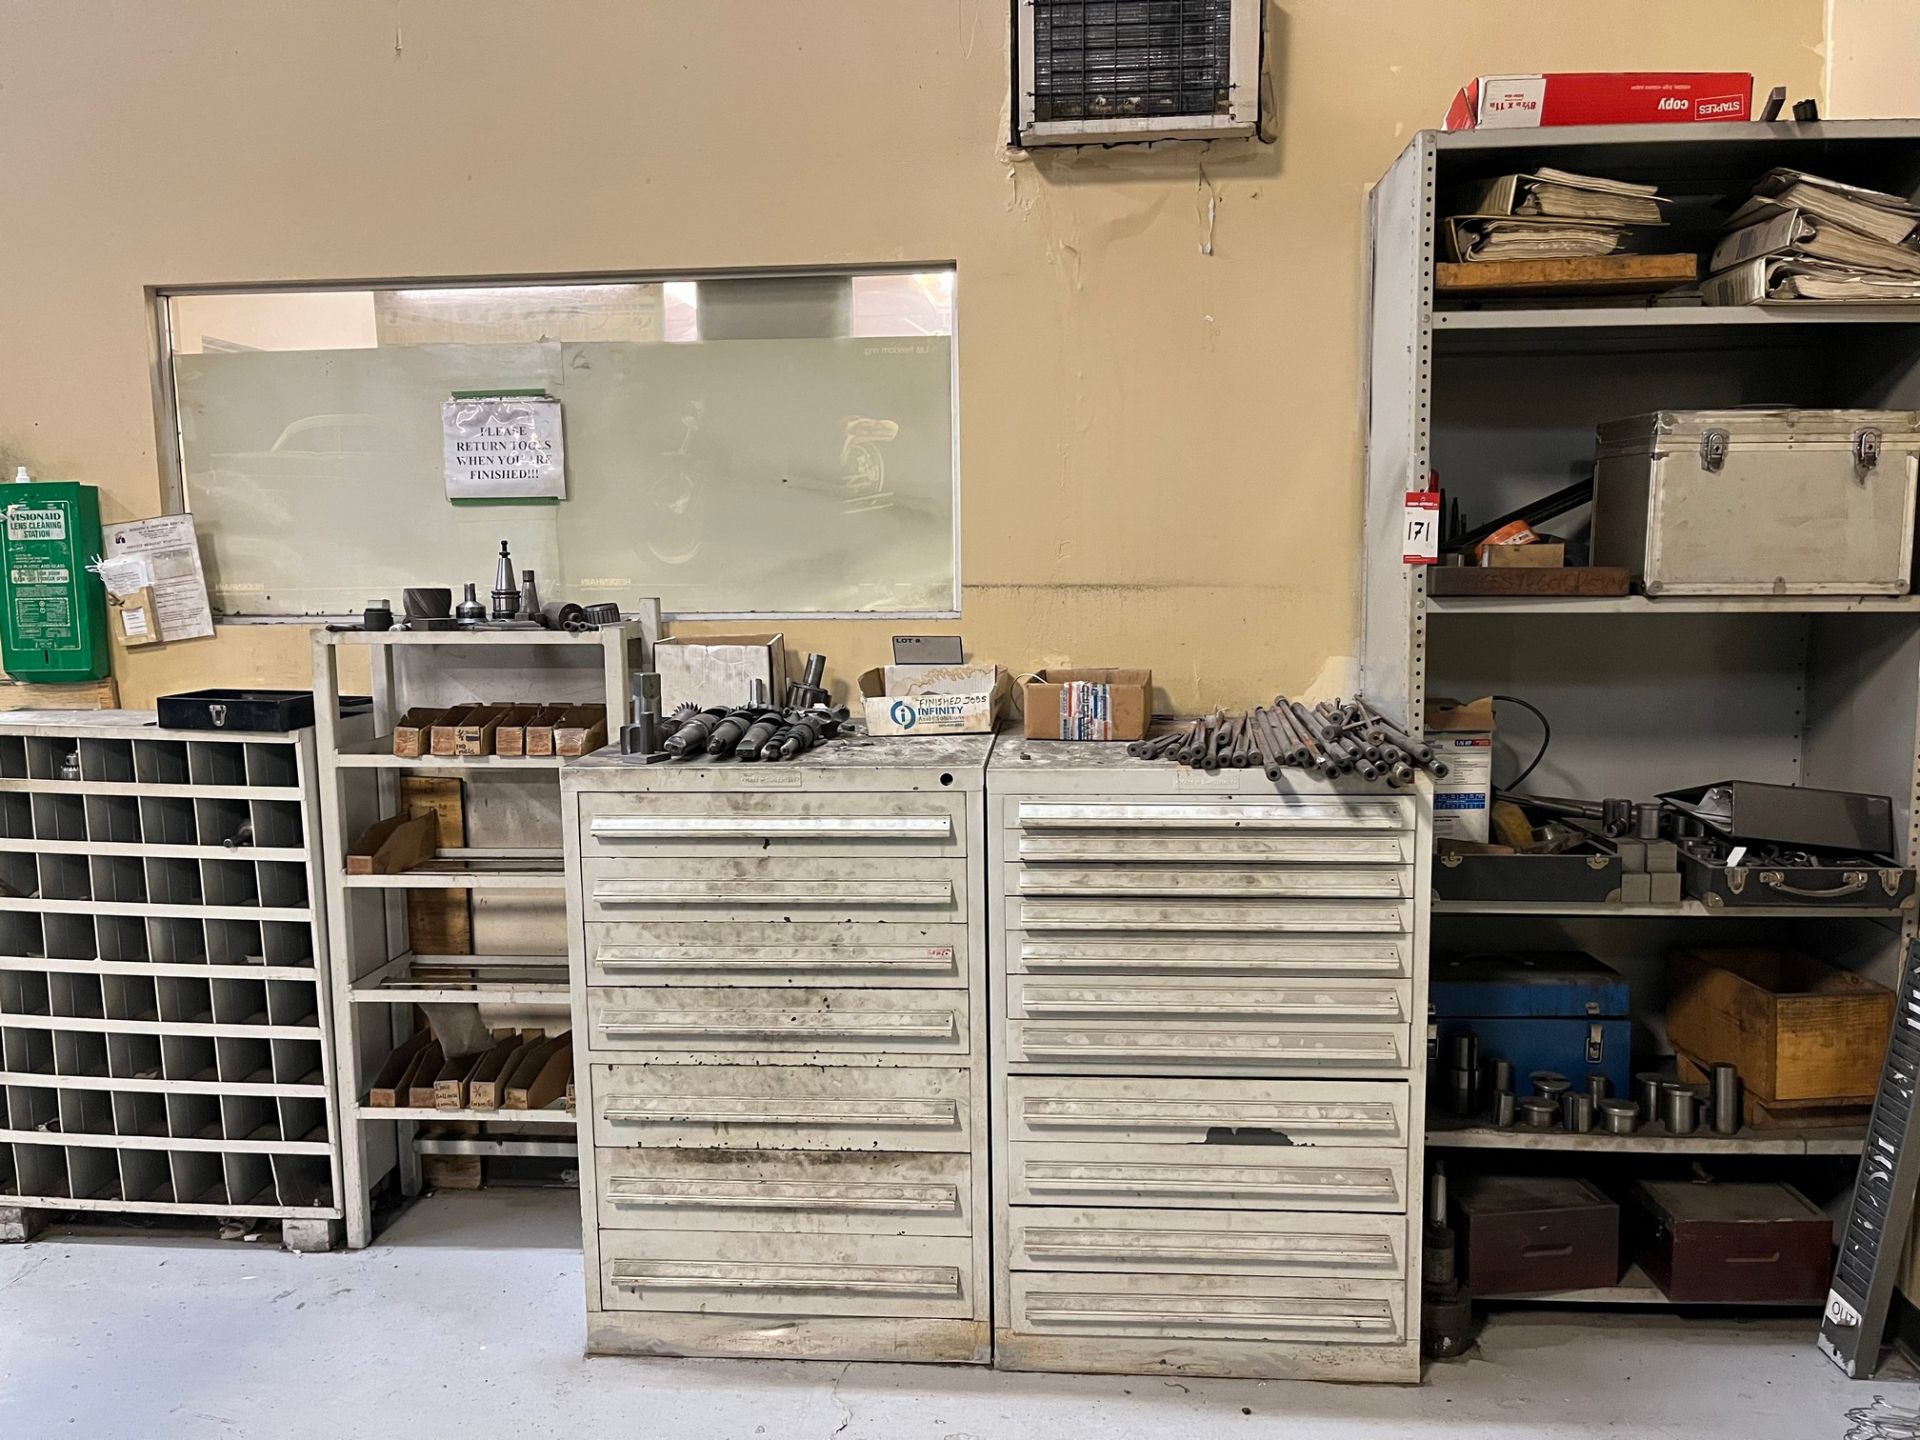 LOT OF ASST. HEAVY DUTY STORAGE CABINET & RACKS W/ CONTENTS, TOOLING, REAMERS, TAPS, END MILLS,